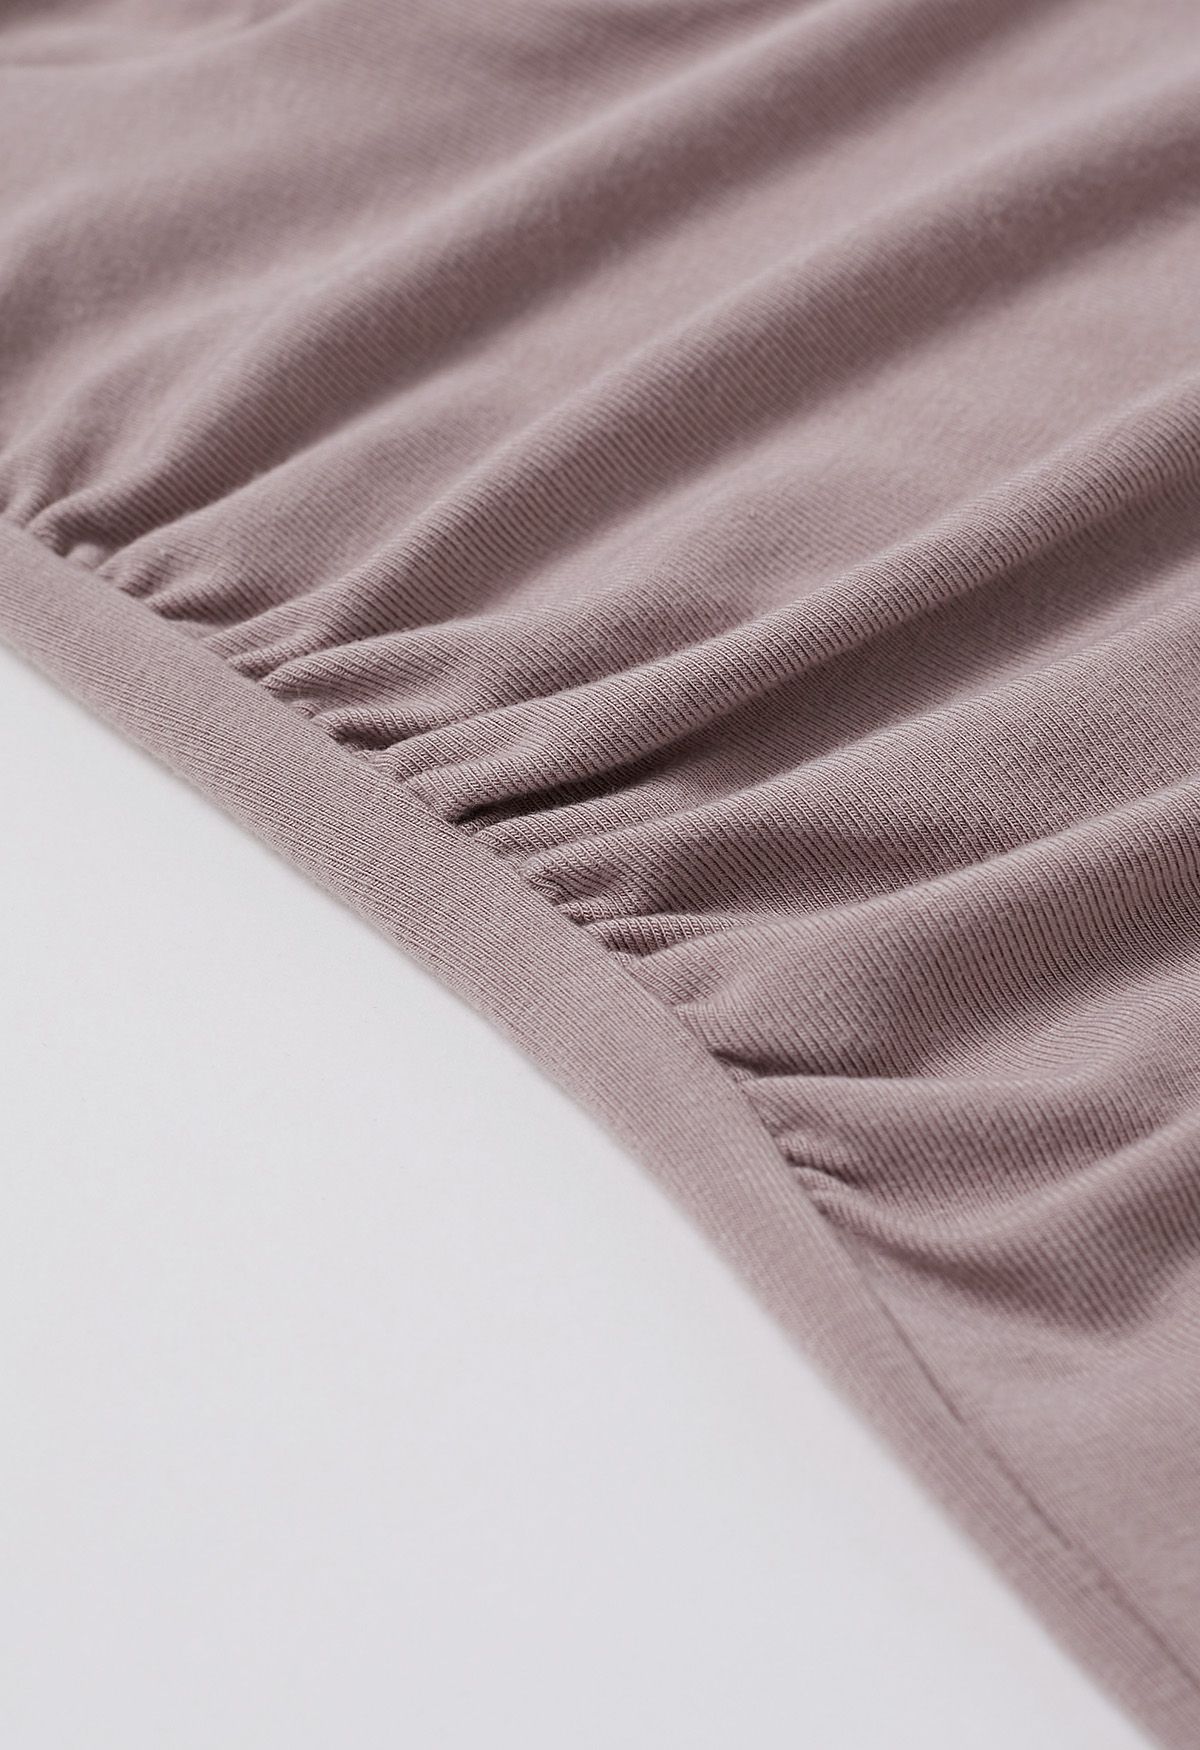 Side Knotted Soft Cotton Top in Dusty Pink